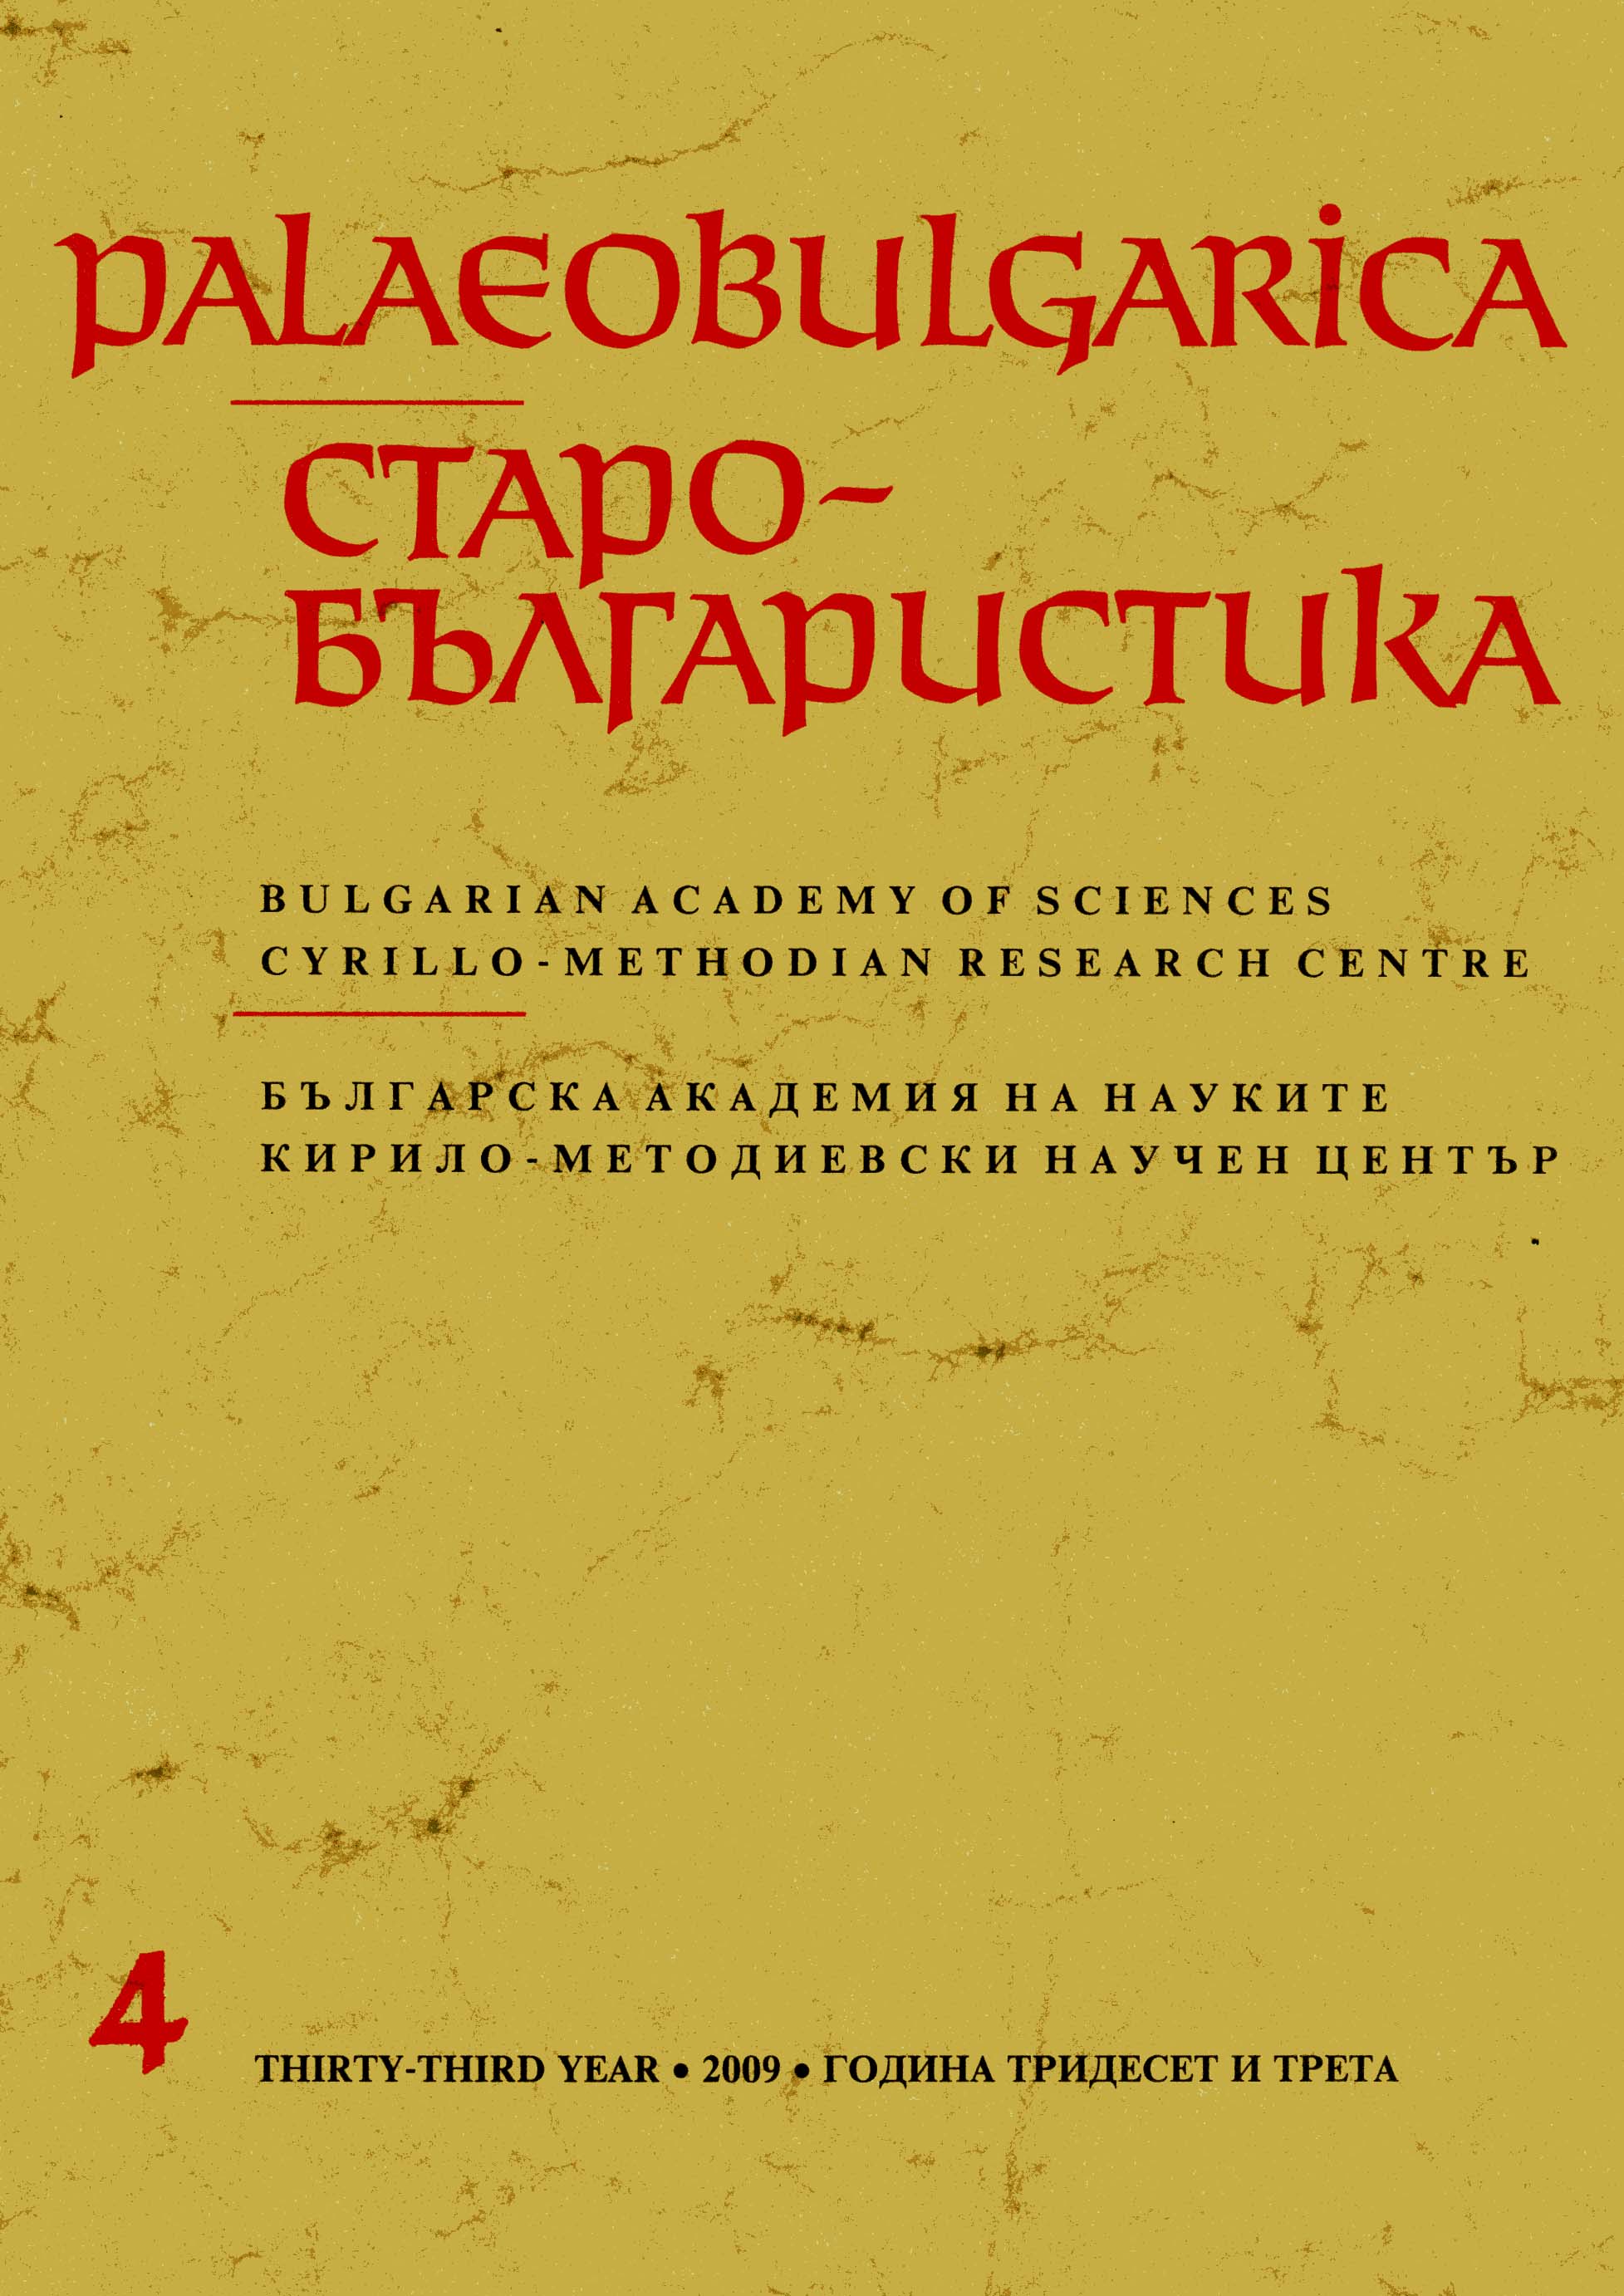 The International Scholarly Conference “The Cyrillo-Methodian Cultural Heritage and National Identity” Cover Image